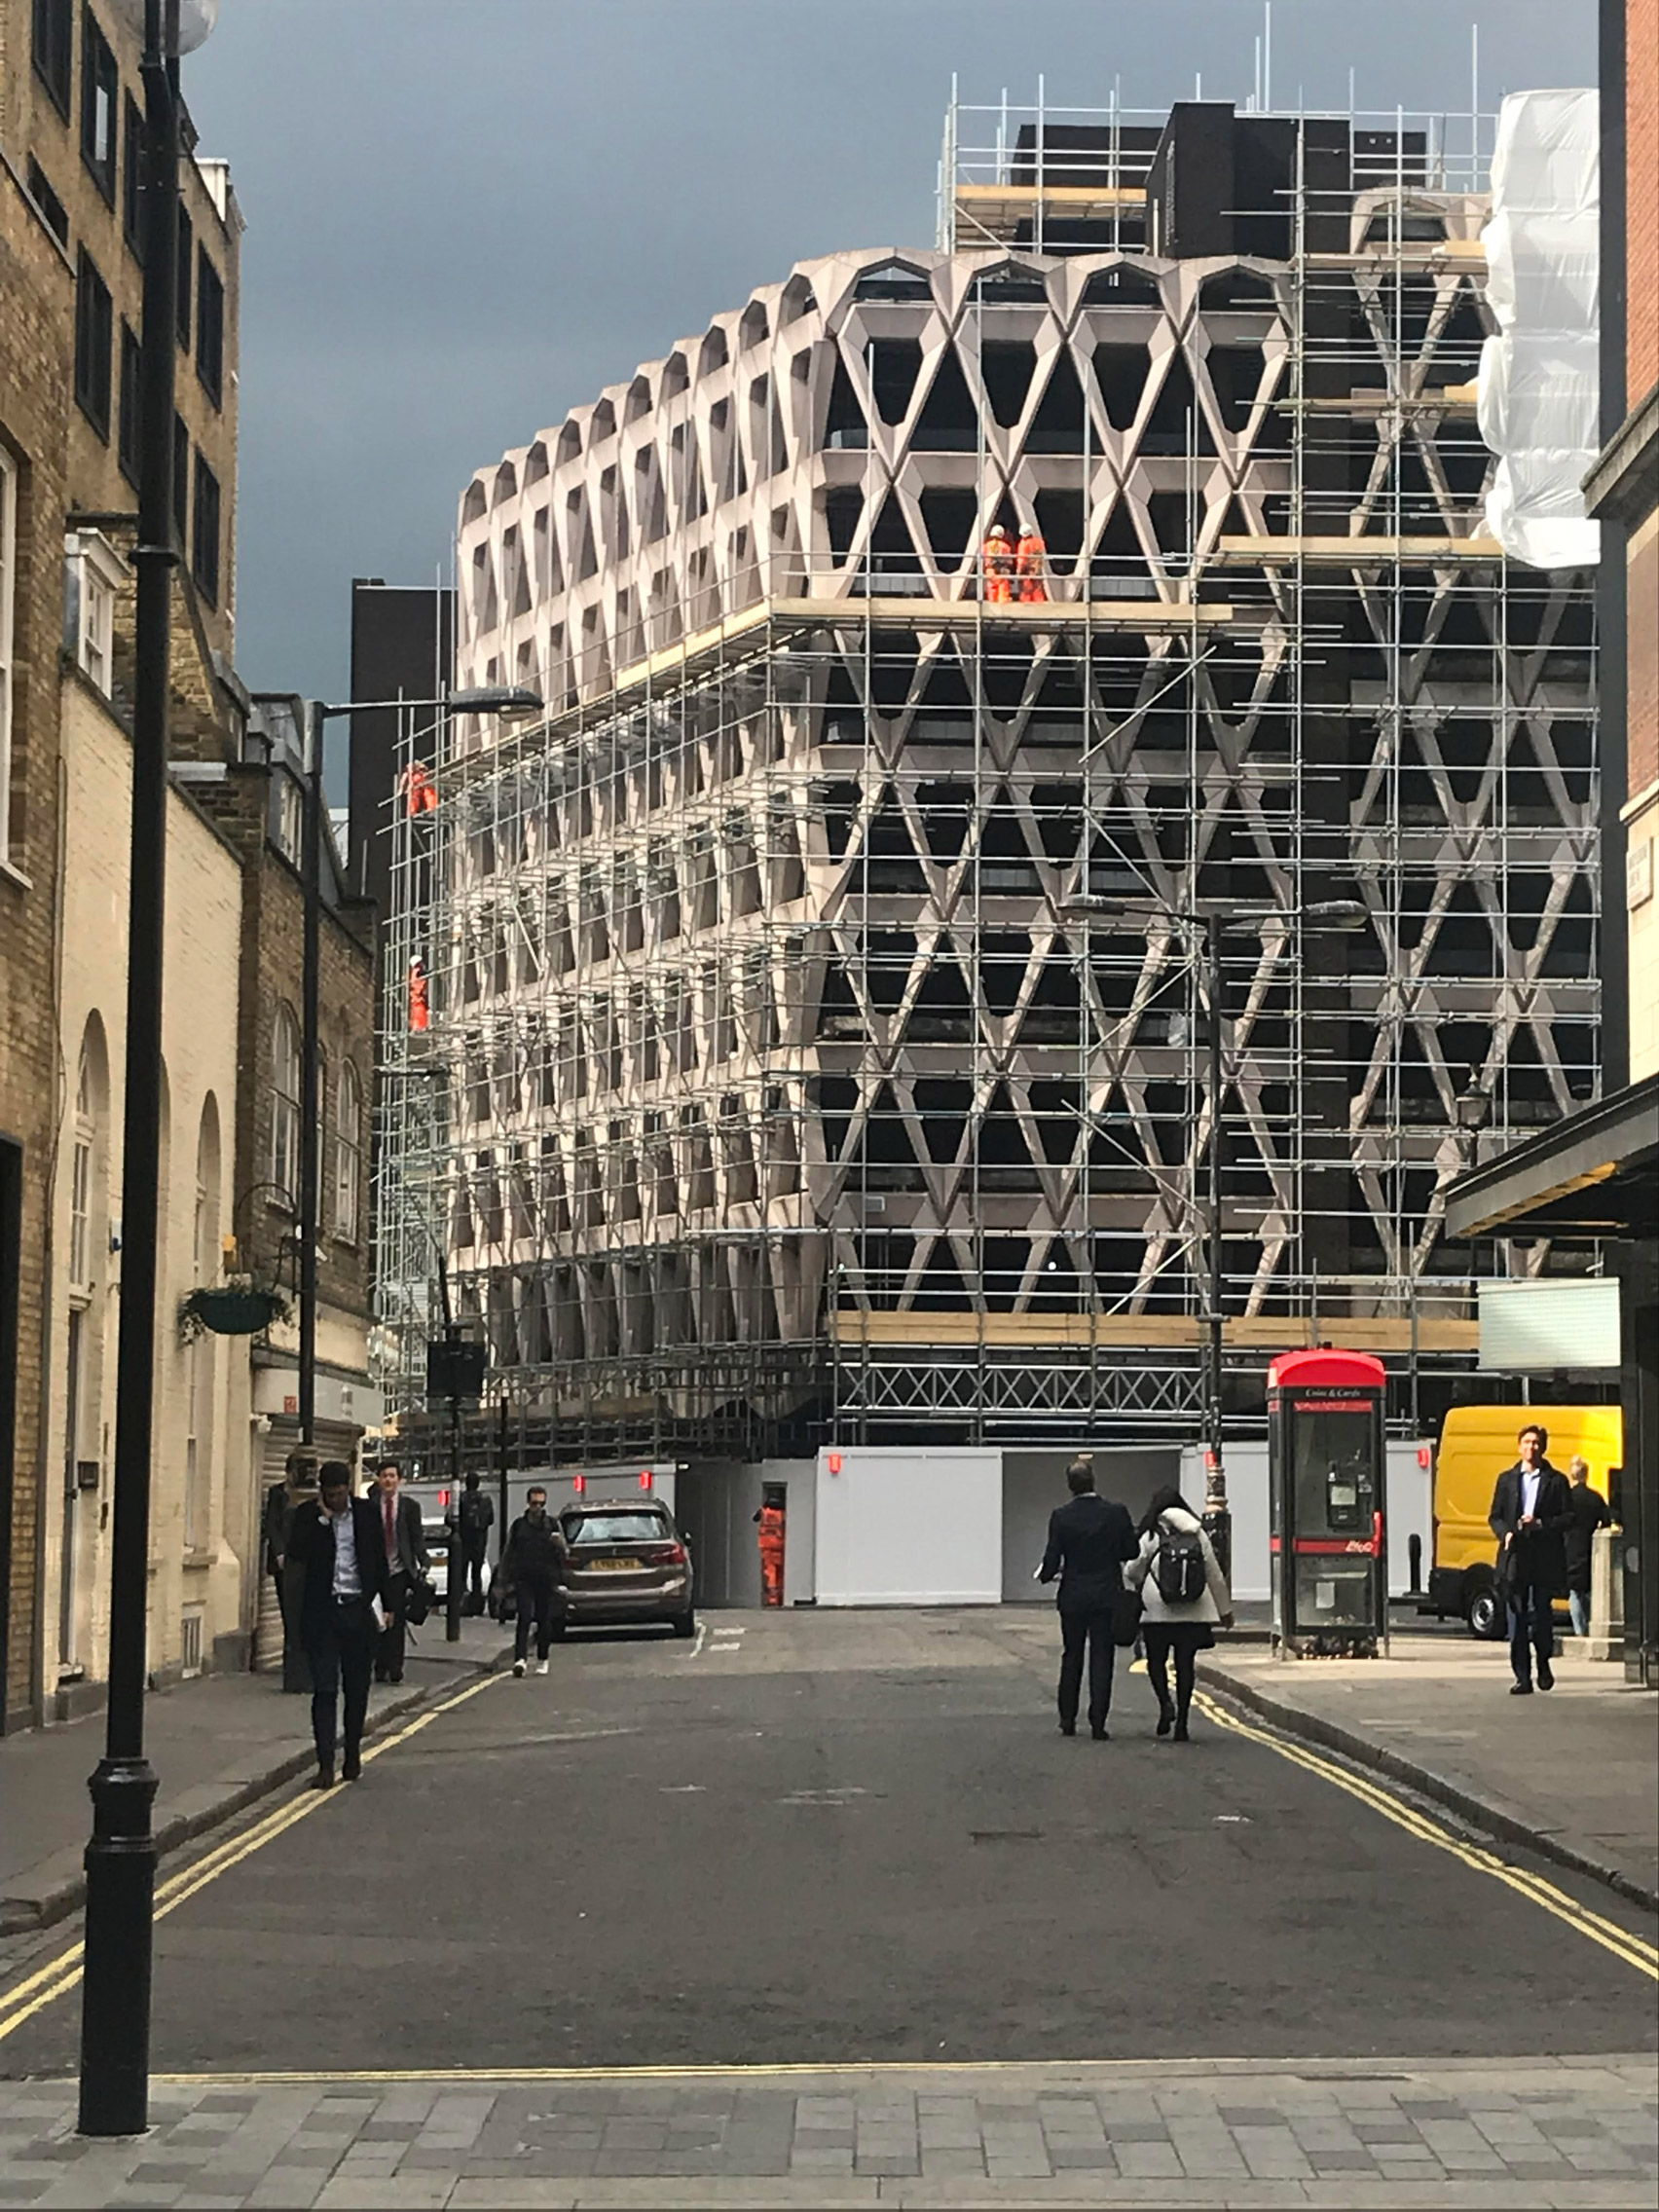 London's brutalist Welbeck Street car park with its distinctive precast concrete facade is being demolished ahead of the site becoming a hotel.